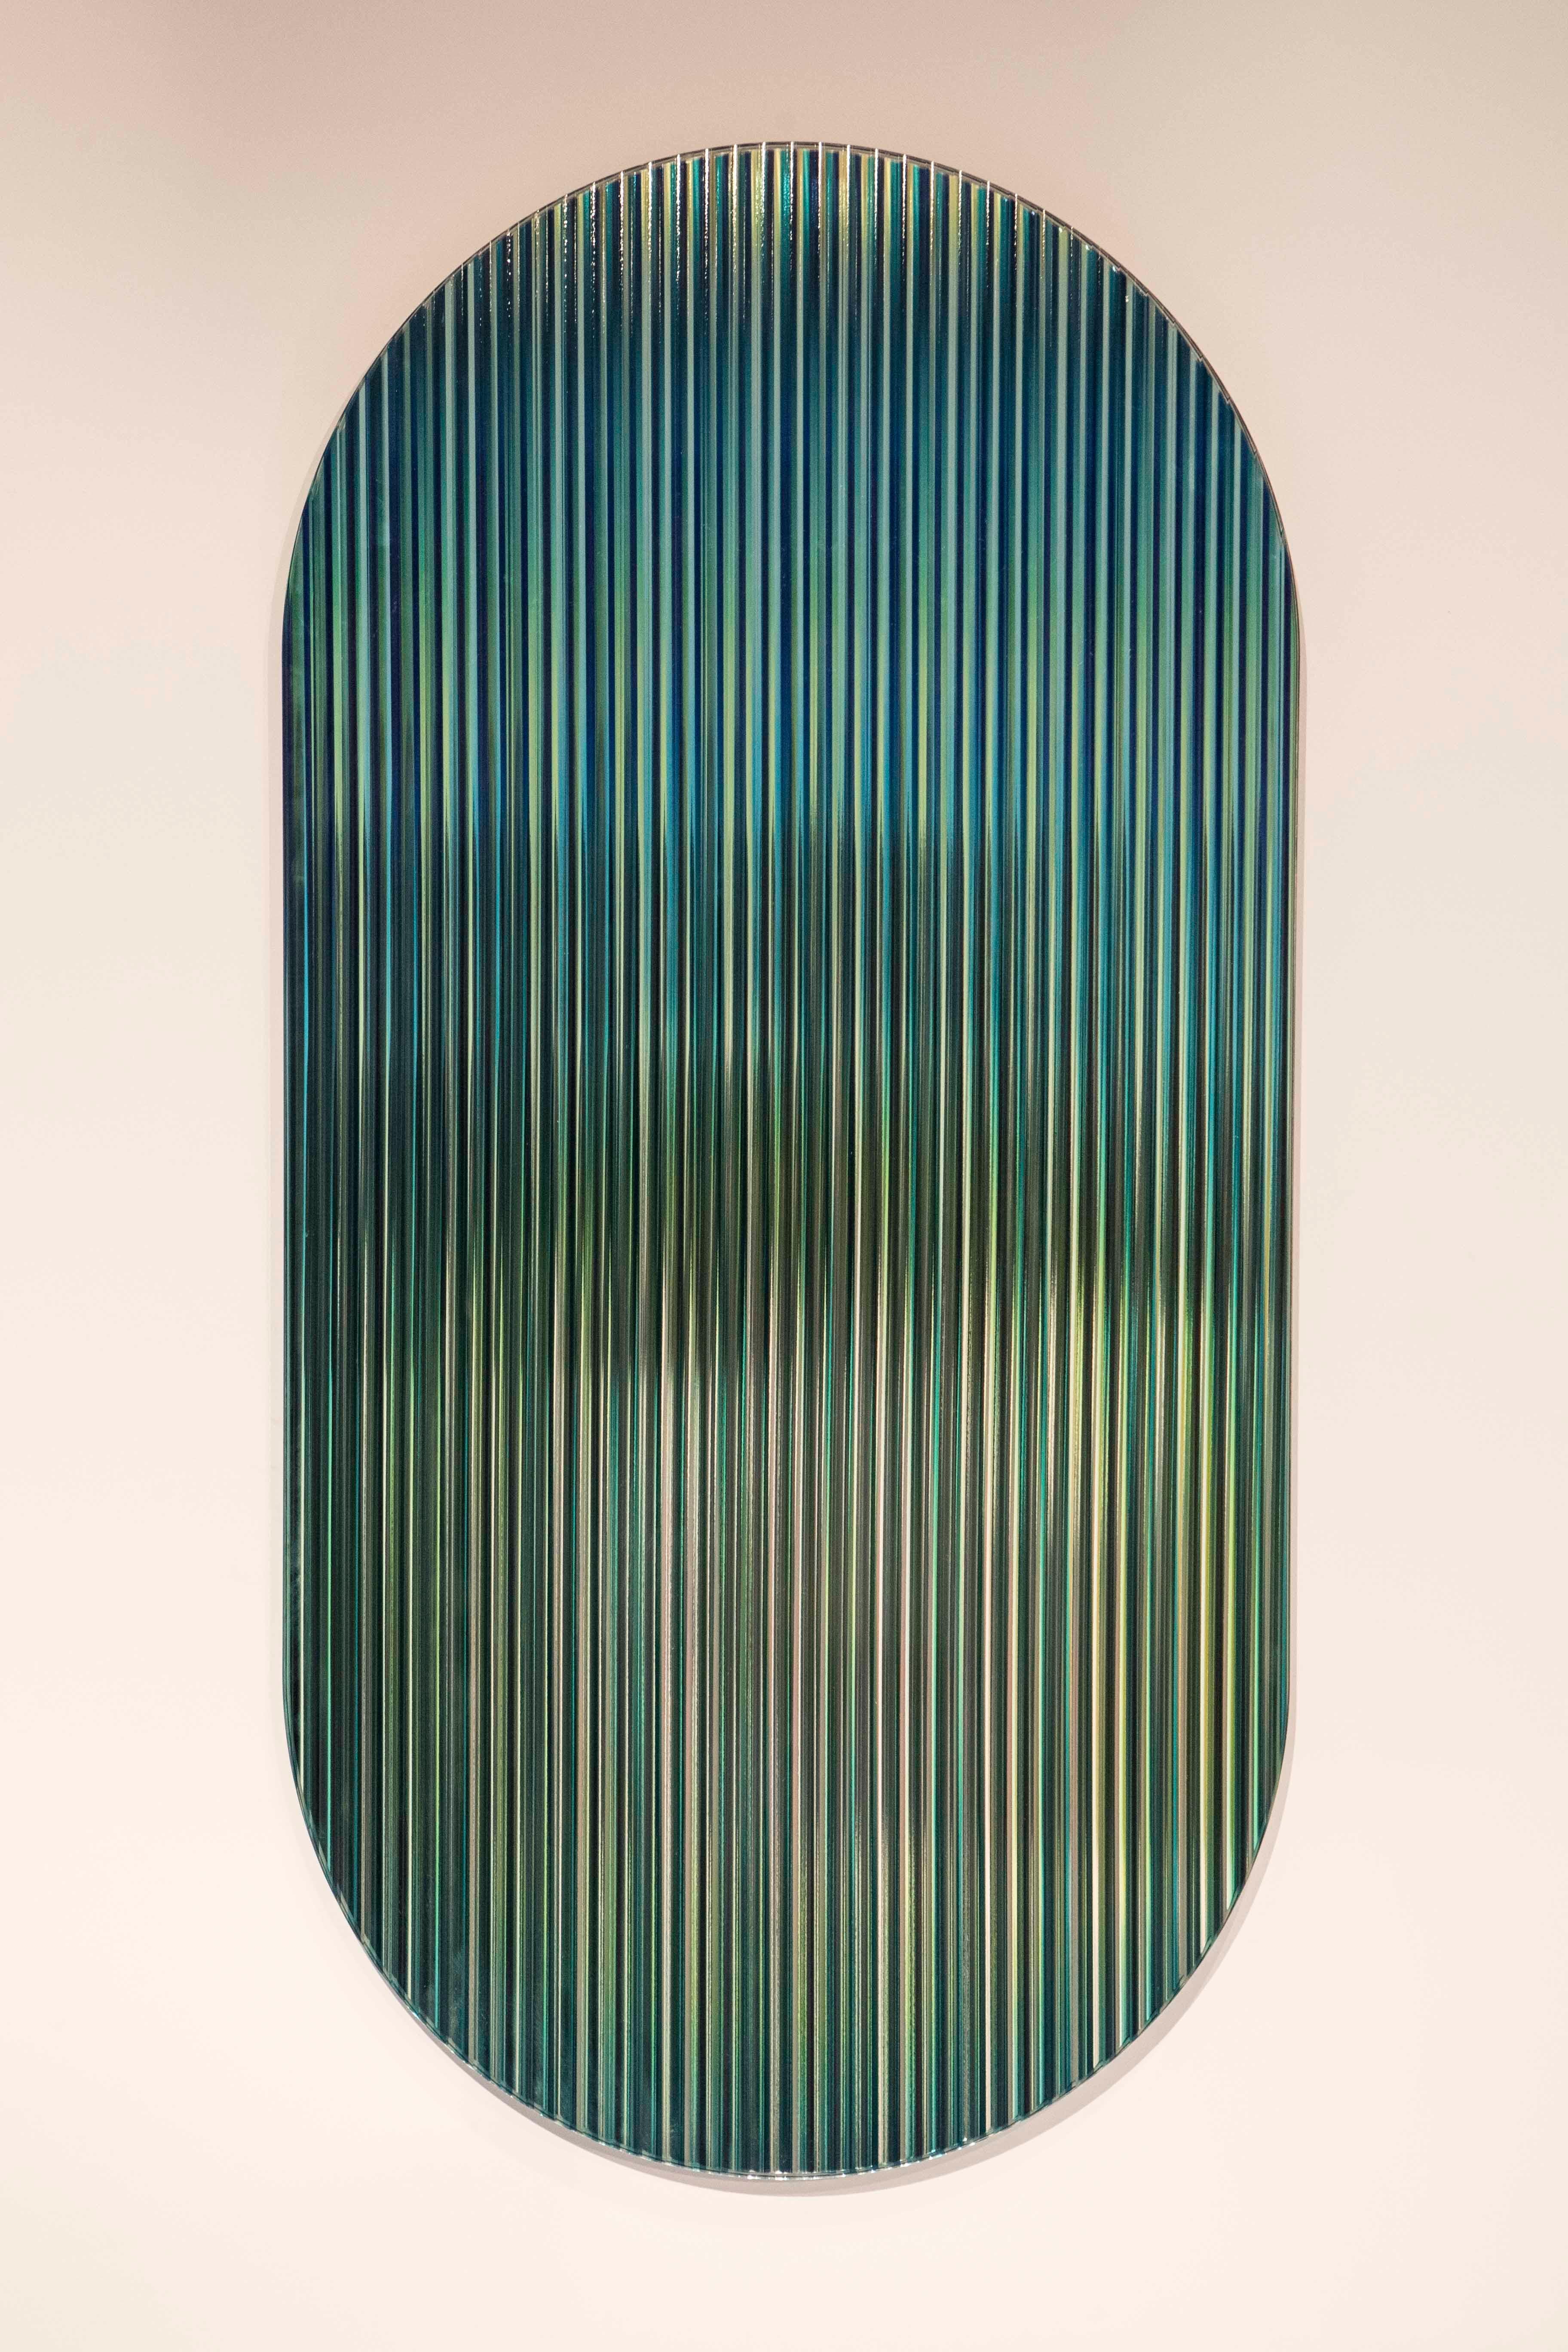 Contemporary Color Shift Panel Trichroic Green with Glass and Mirror, 1stdibs New York For Sale